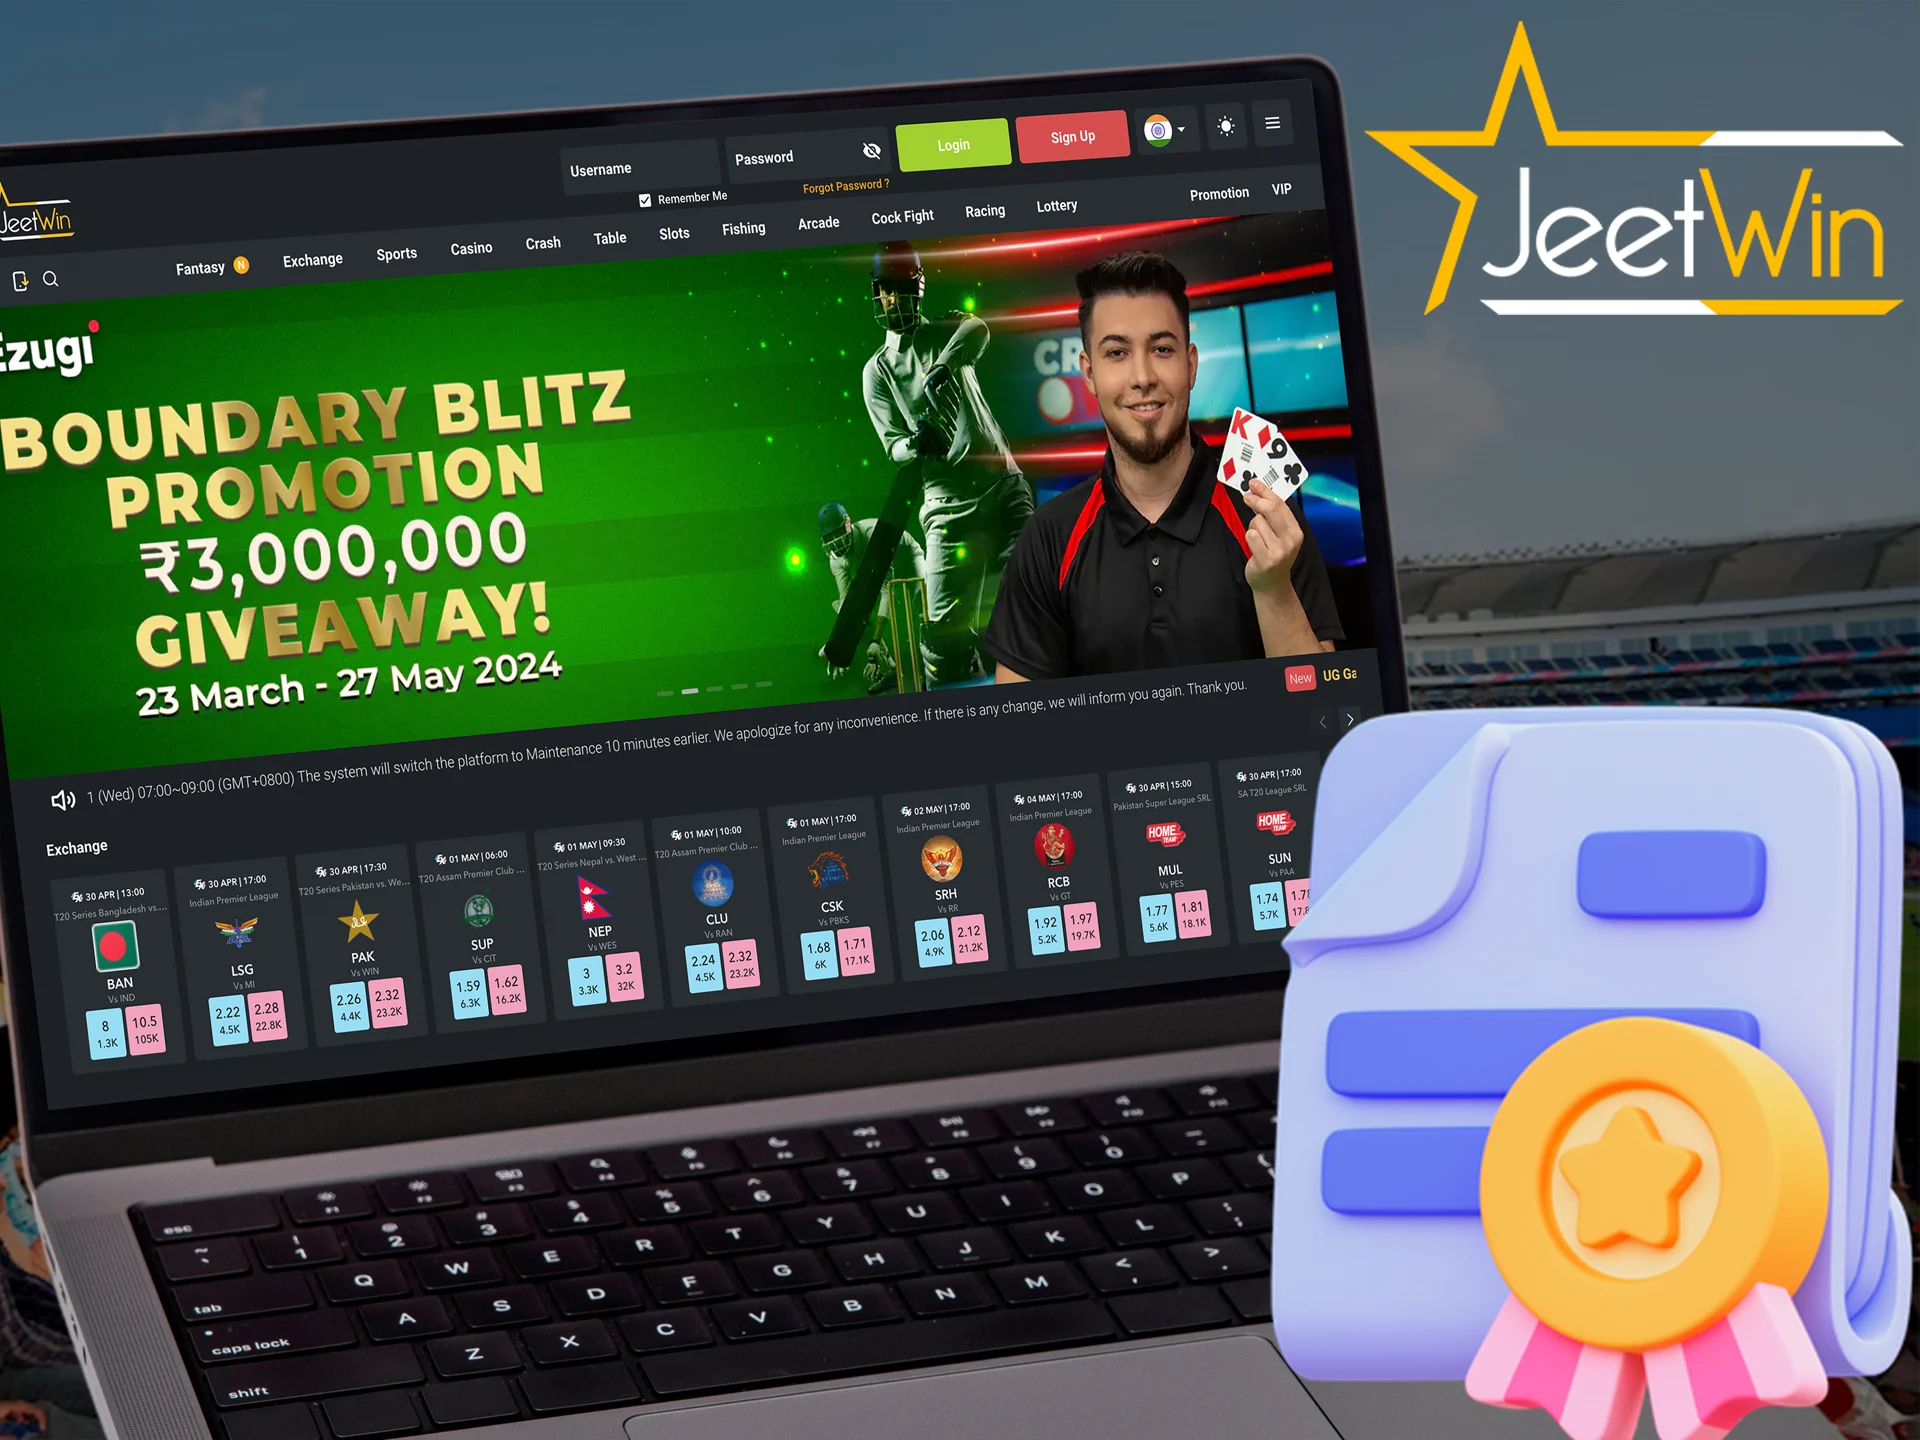 Find out more about the legality of JeetWin casino.